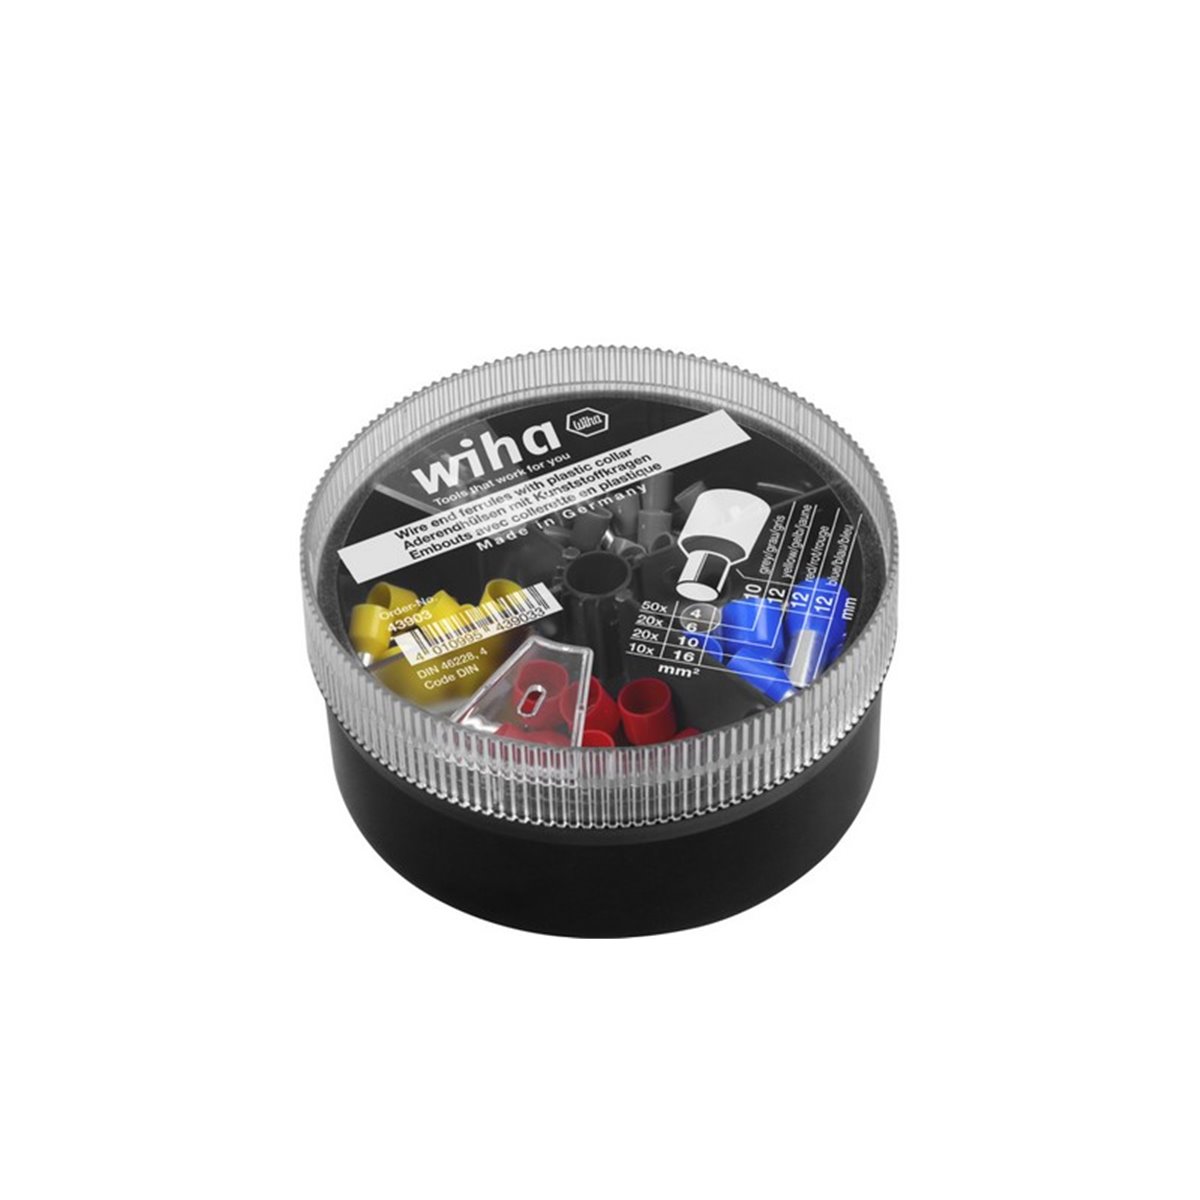 Wiha Wire end sleeves with plastic collar set 4–16 mm², 100 units, DIN colour code, in dispenser (43903)